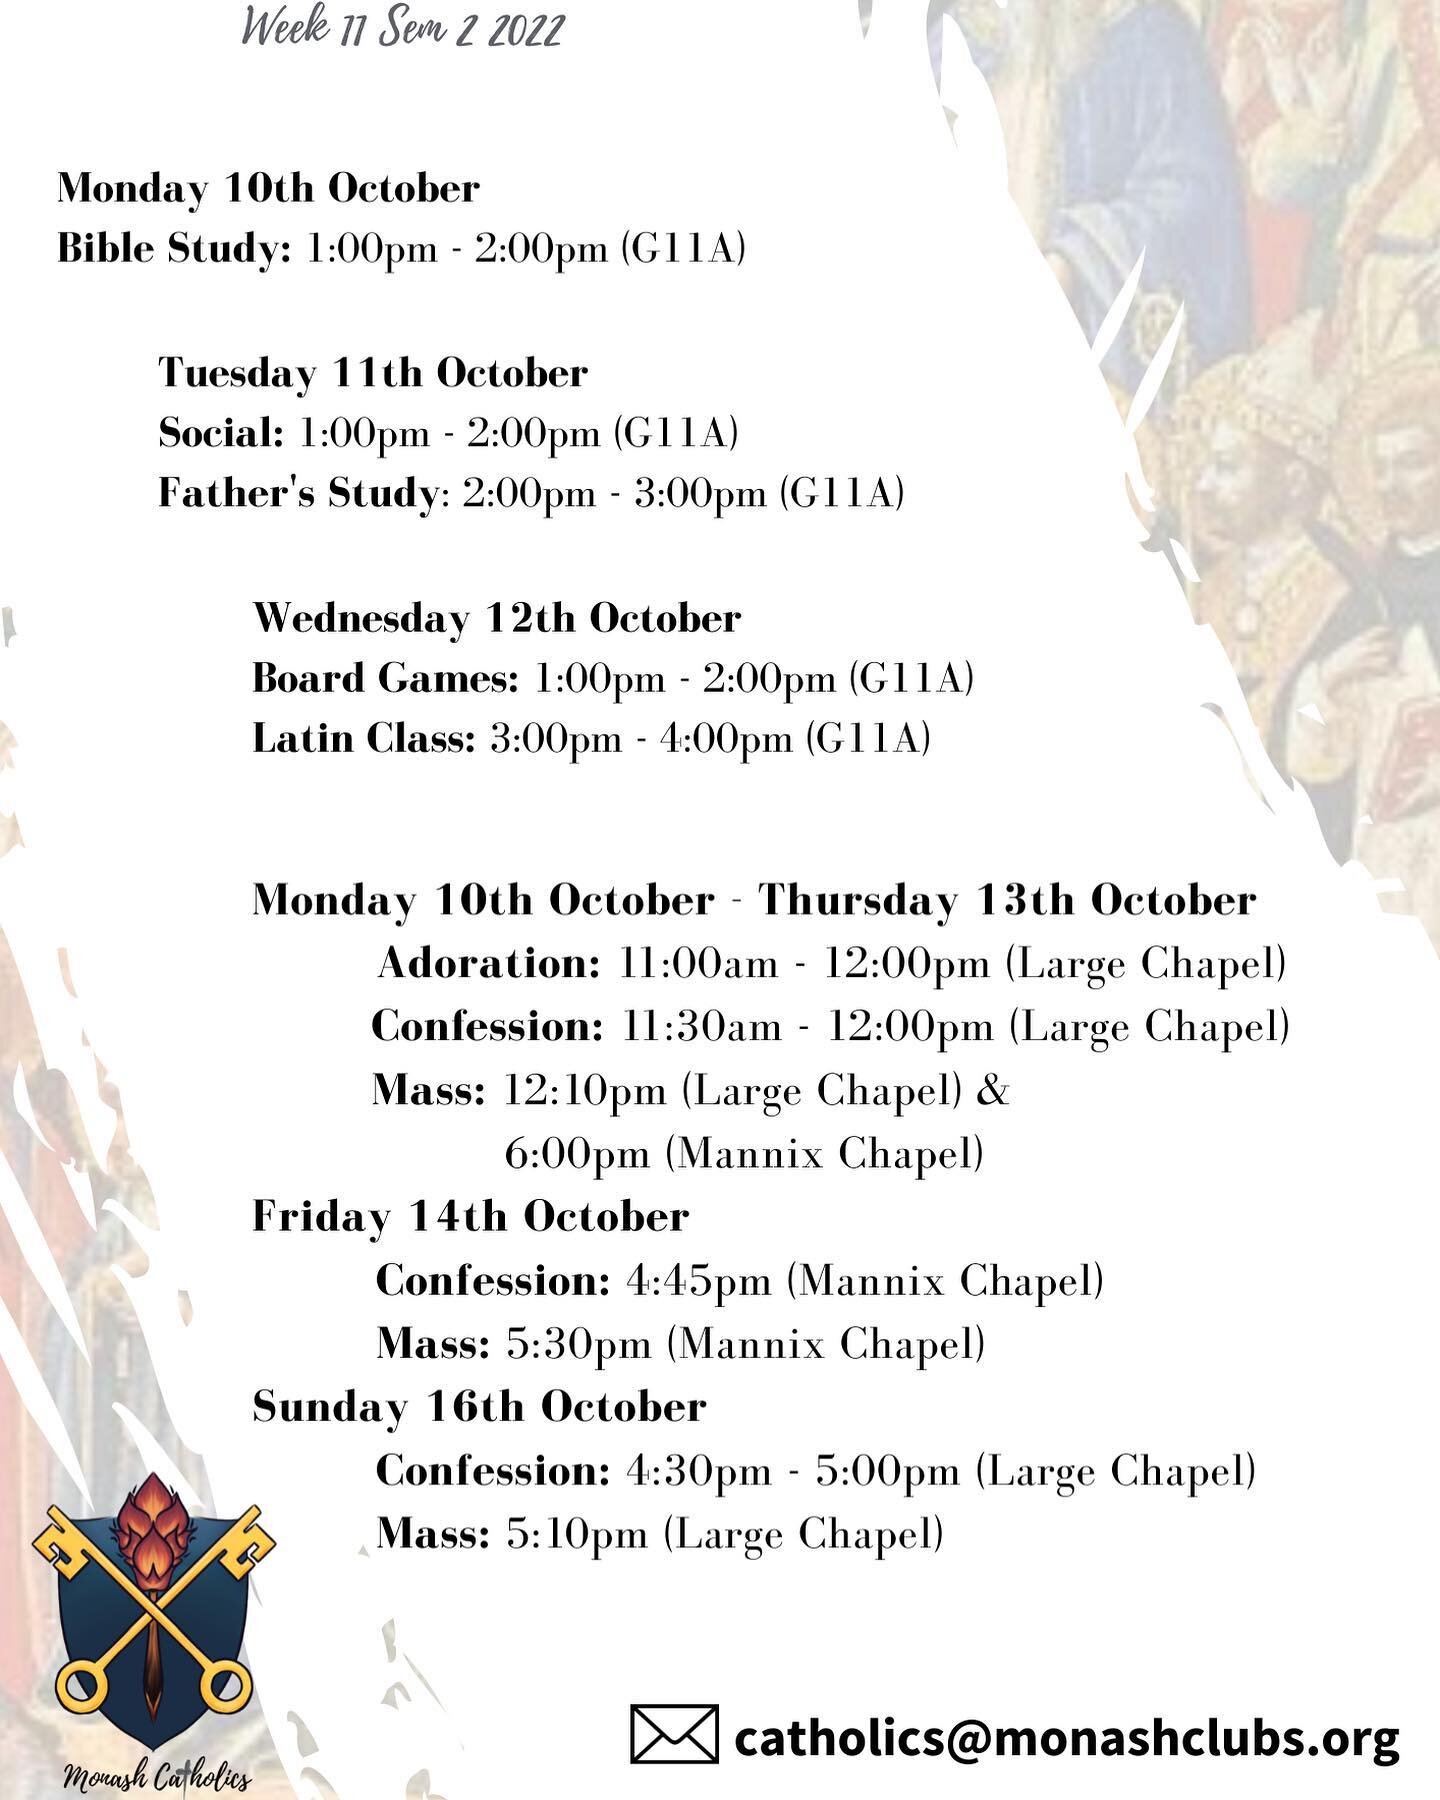 Hey everyone,
We hope you enjoyed your weekend and we look forward to seeing you around at some of our events this week!